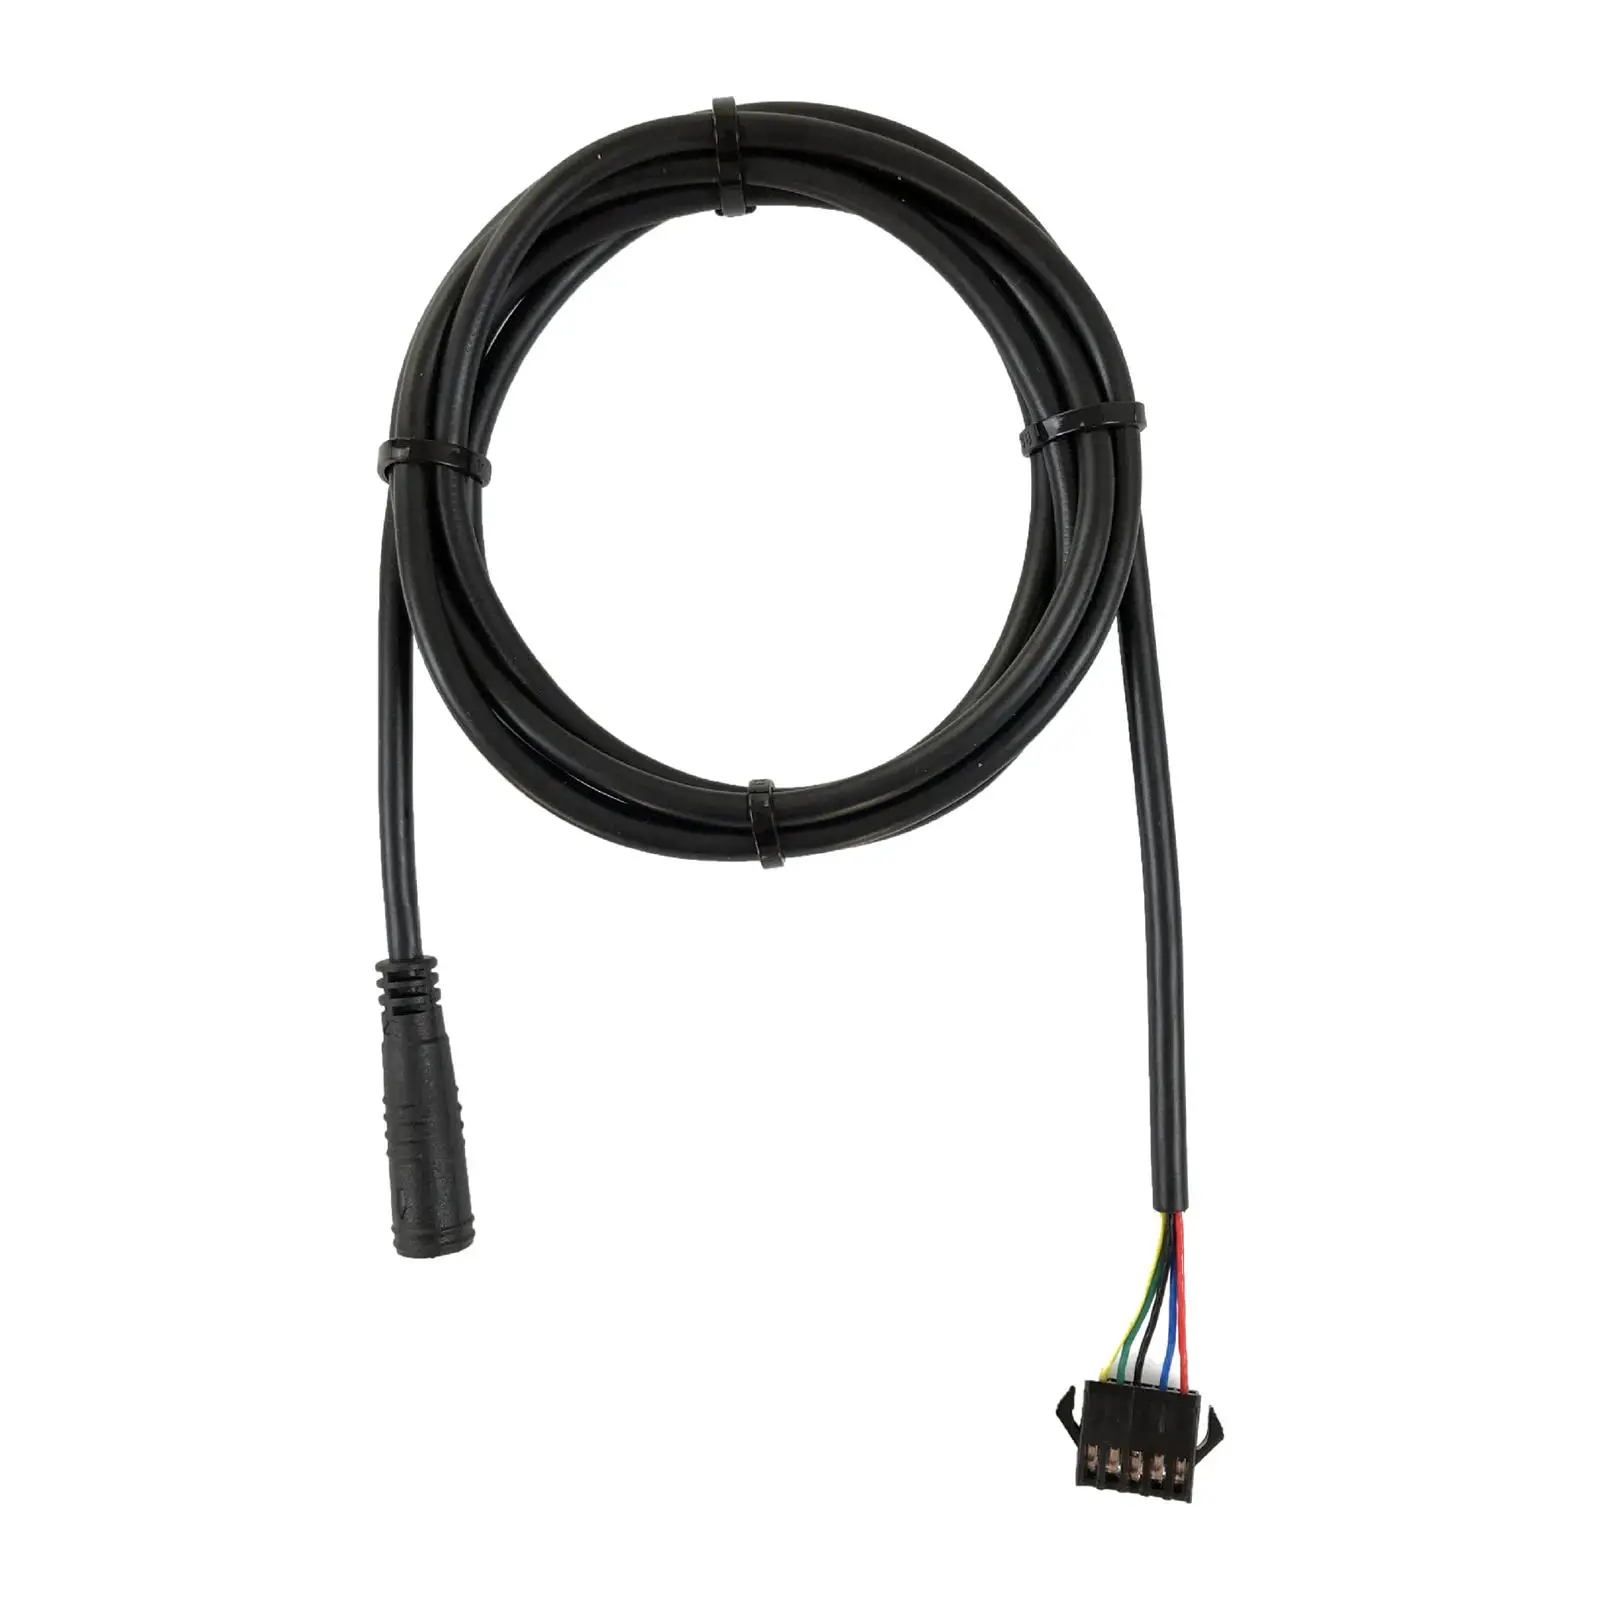 5 Pin Electric Bicycle Extension Cable Plug Connector 57inch Components Female Electric Bicycle Connecting Cable for Skateboard